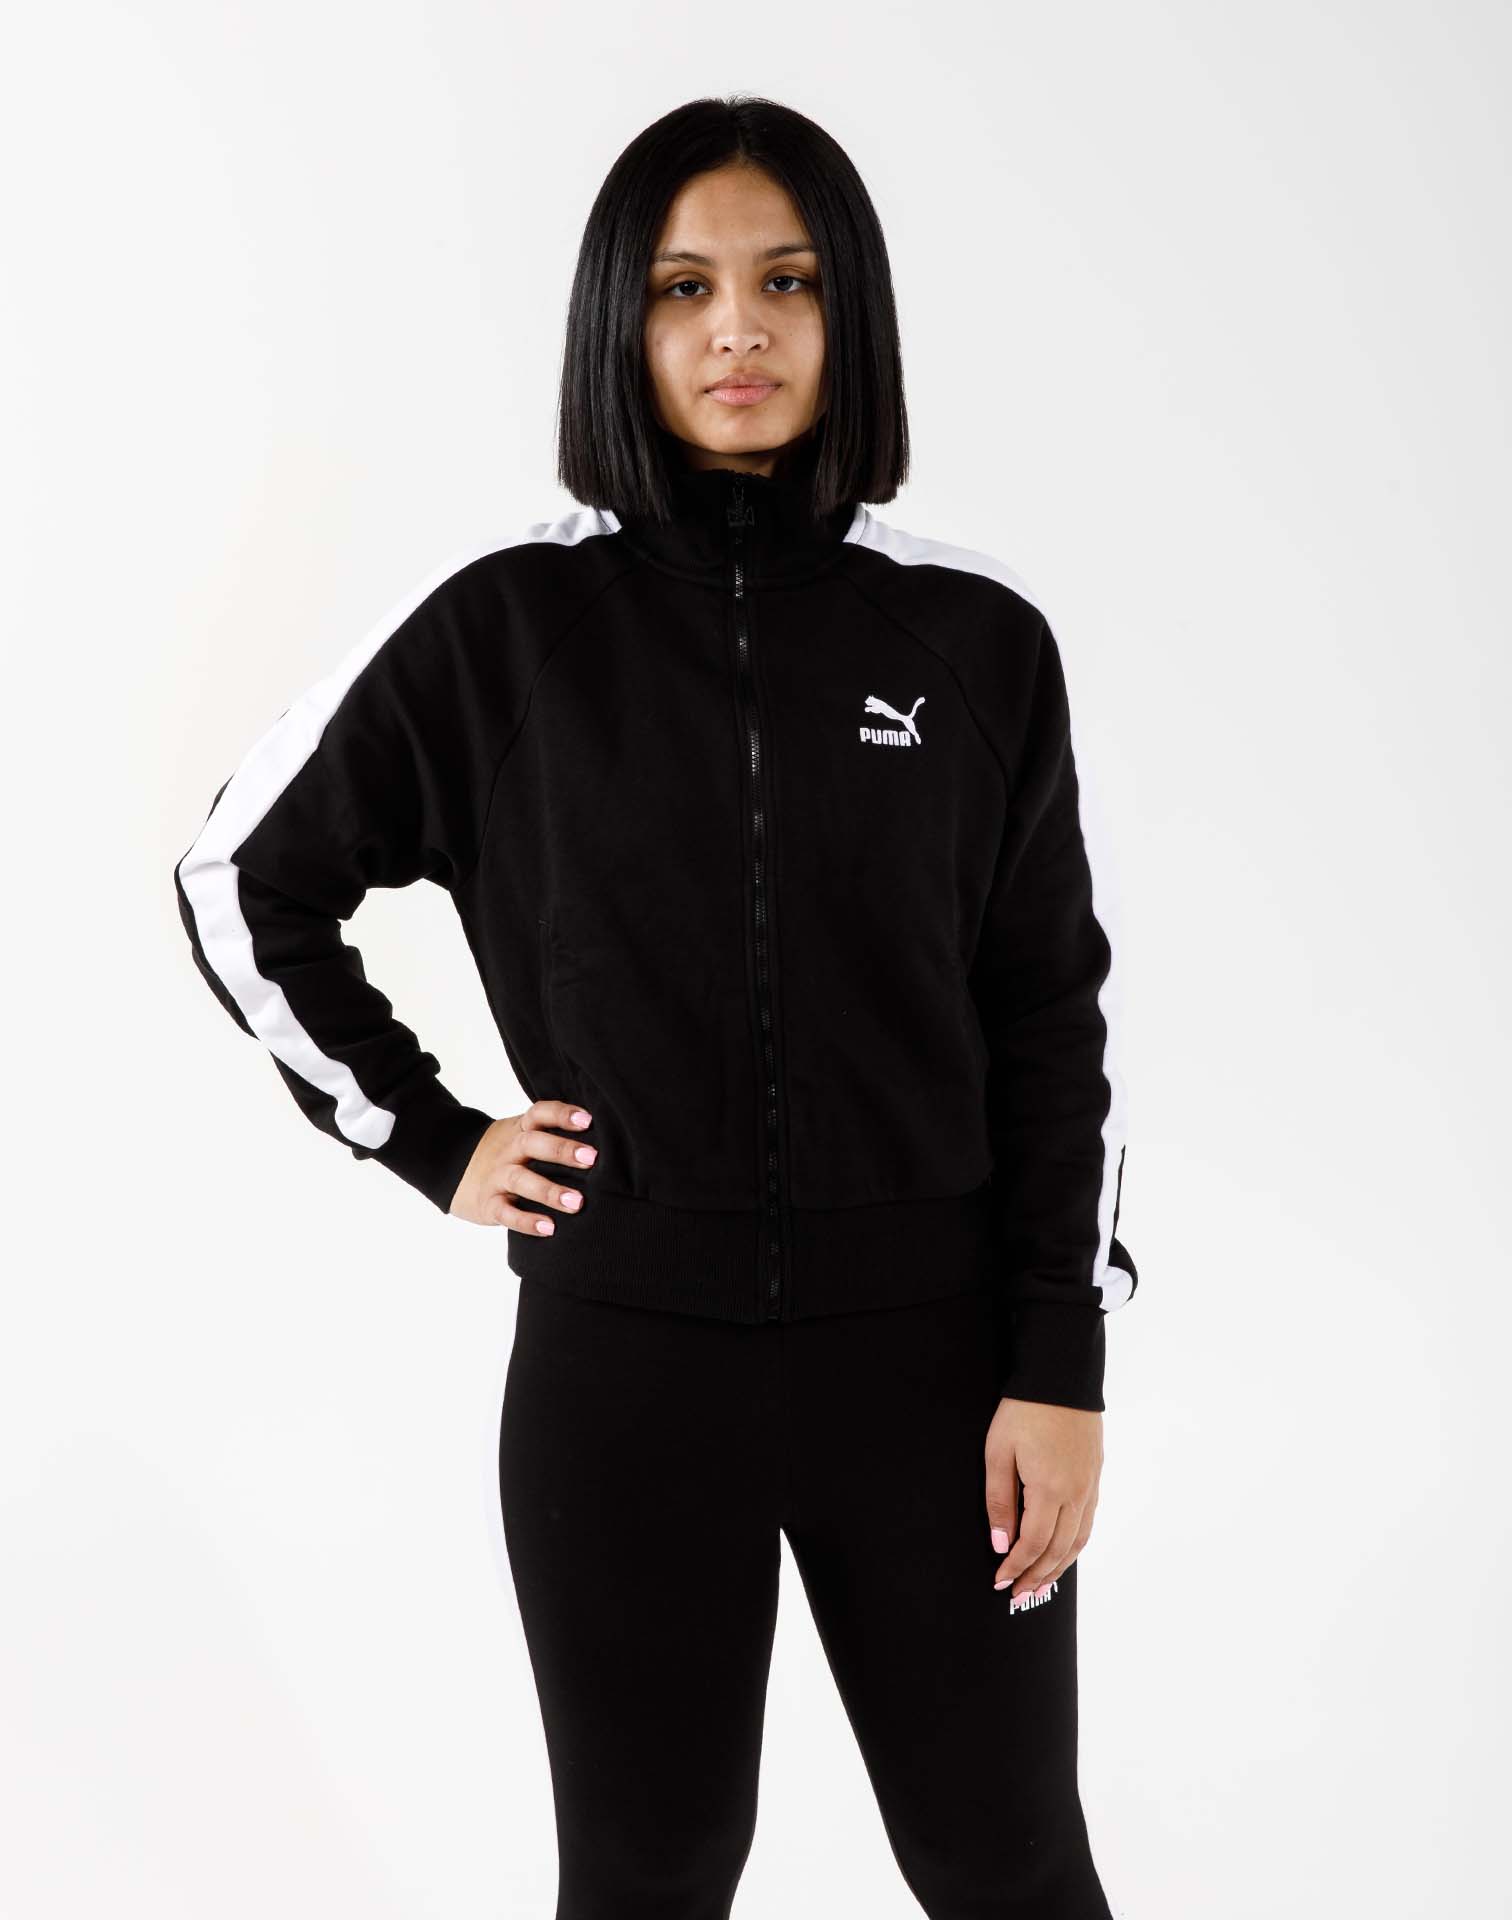 T7 Iconic Track – Puma DTLR Jacket